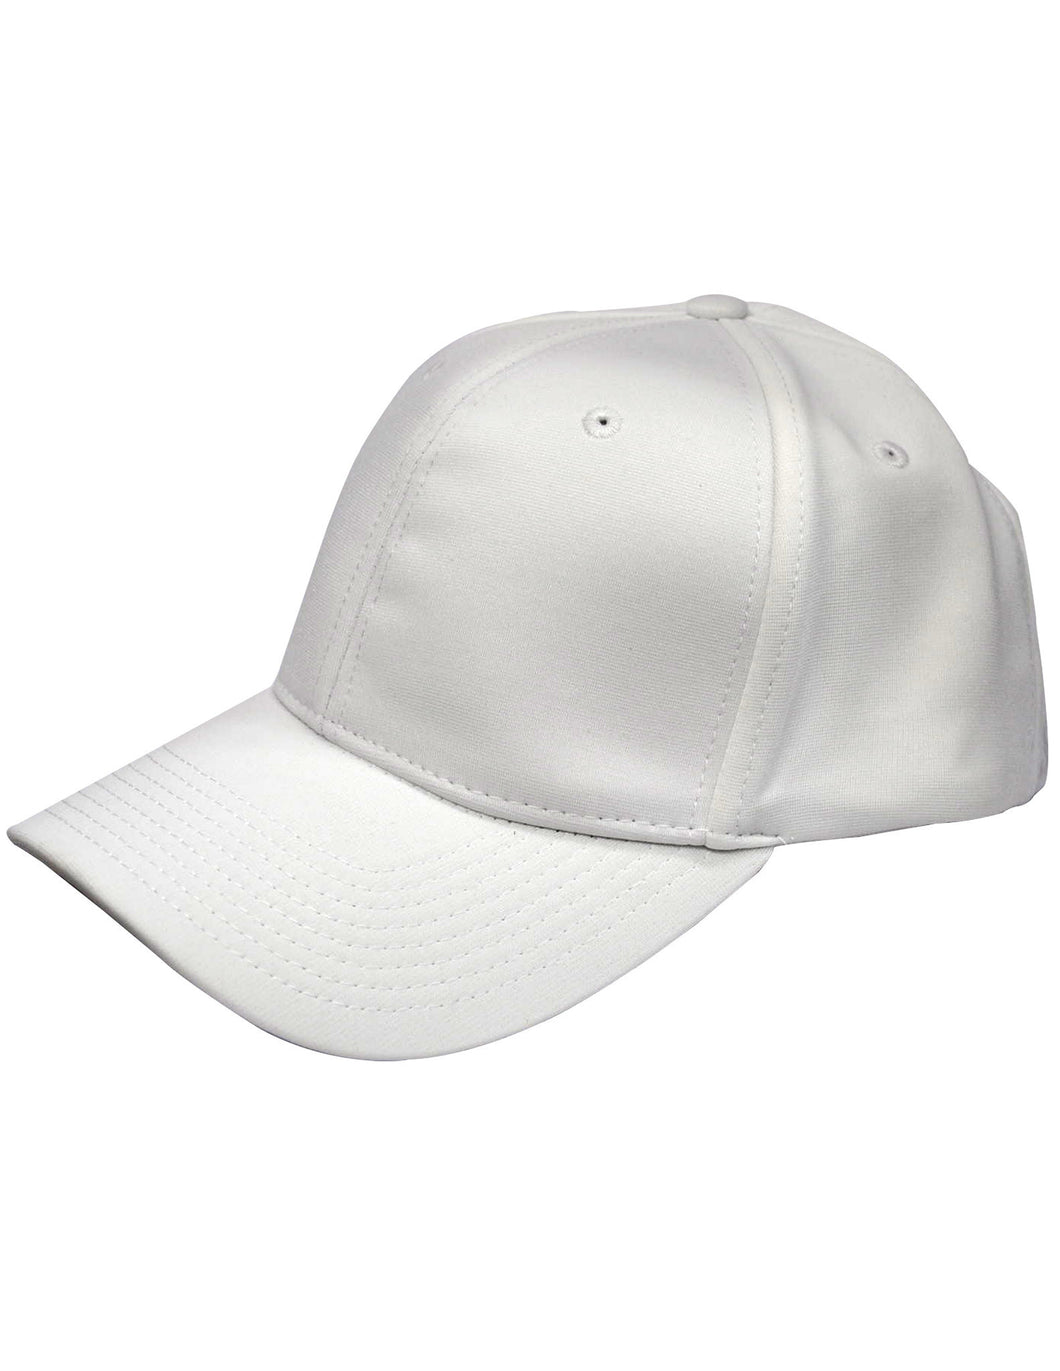 HT101 - Smitty Solid White Flex Fit Football Hat